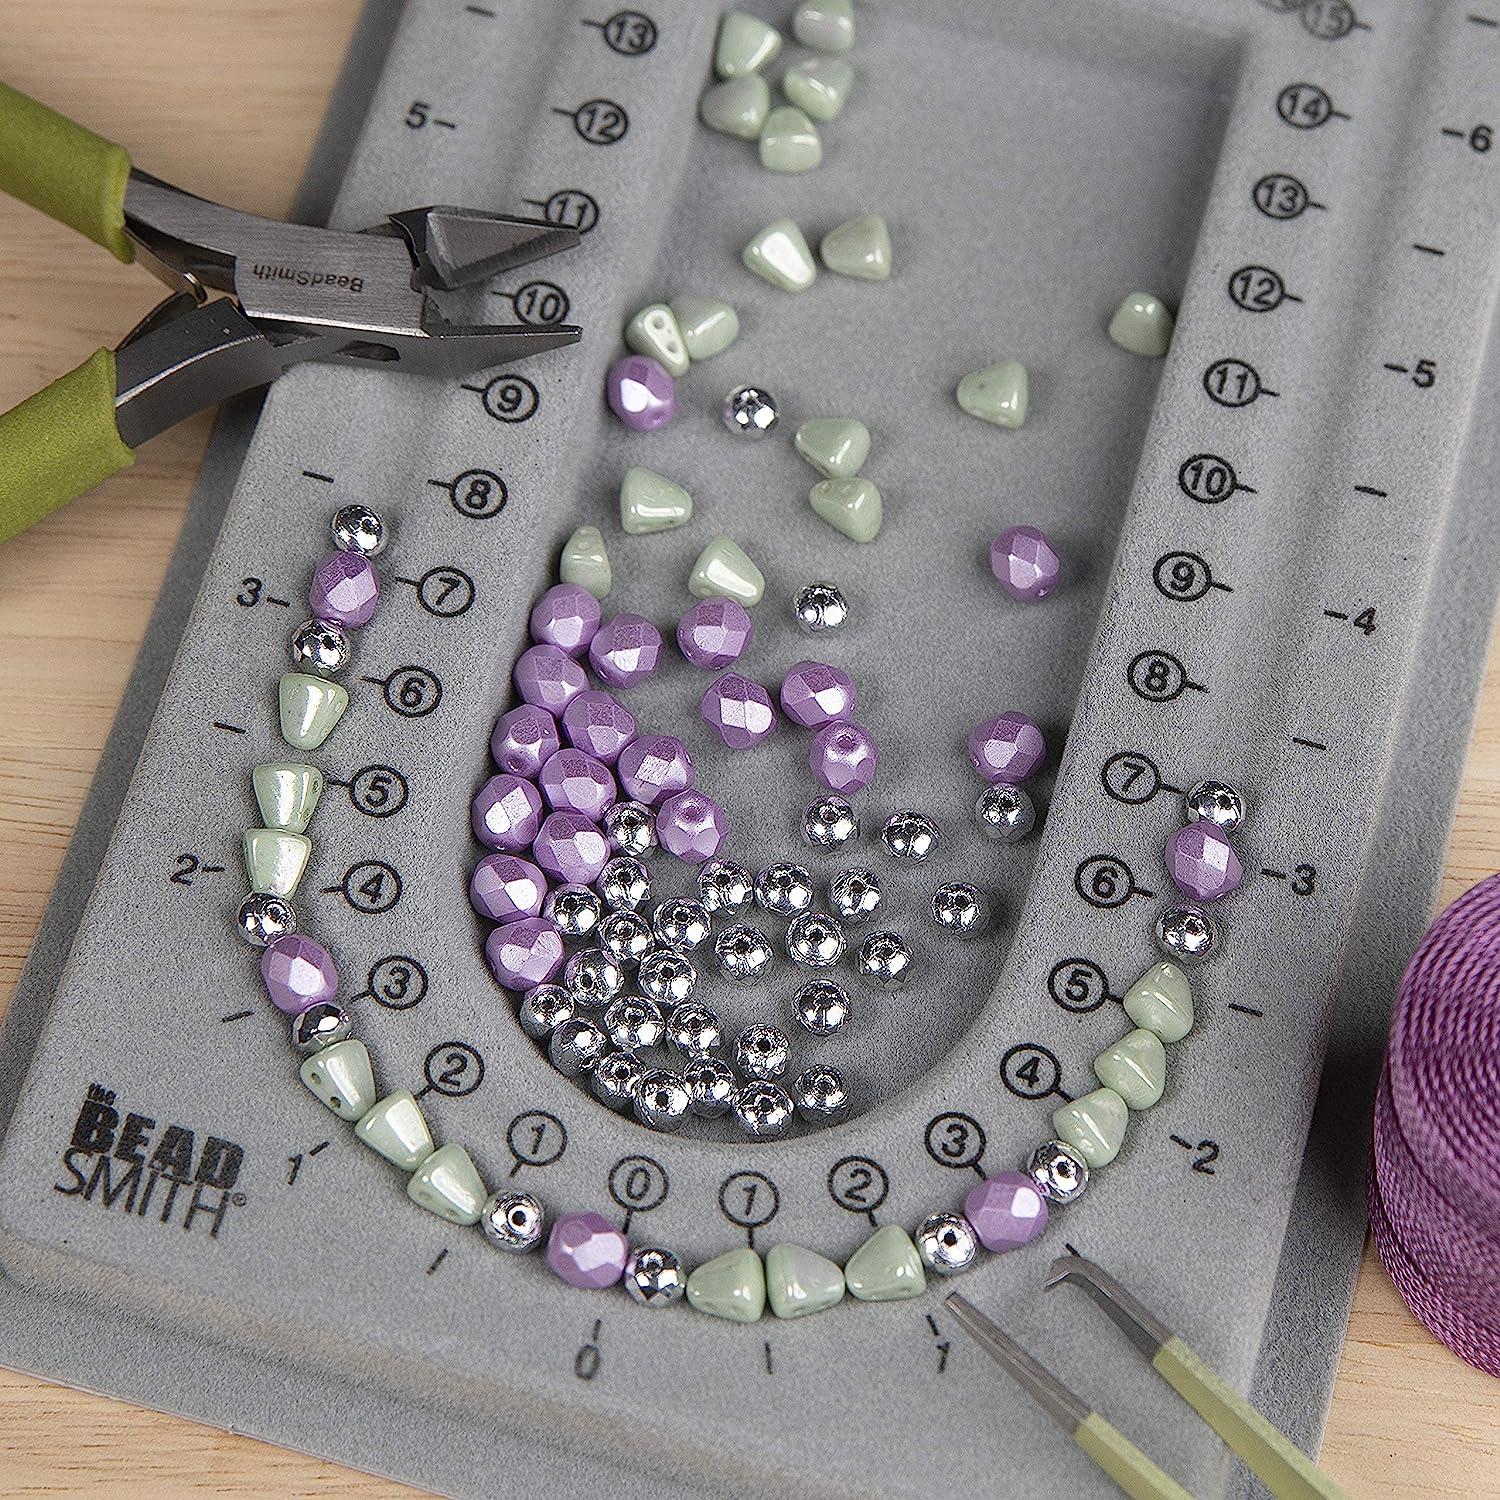 The BeadSmith Mini Travel Bead Design Beading Board, Gray Flock with L –  Nature Beads